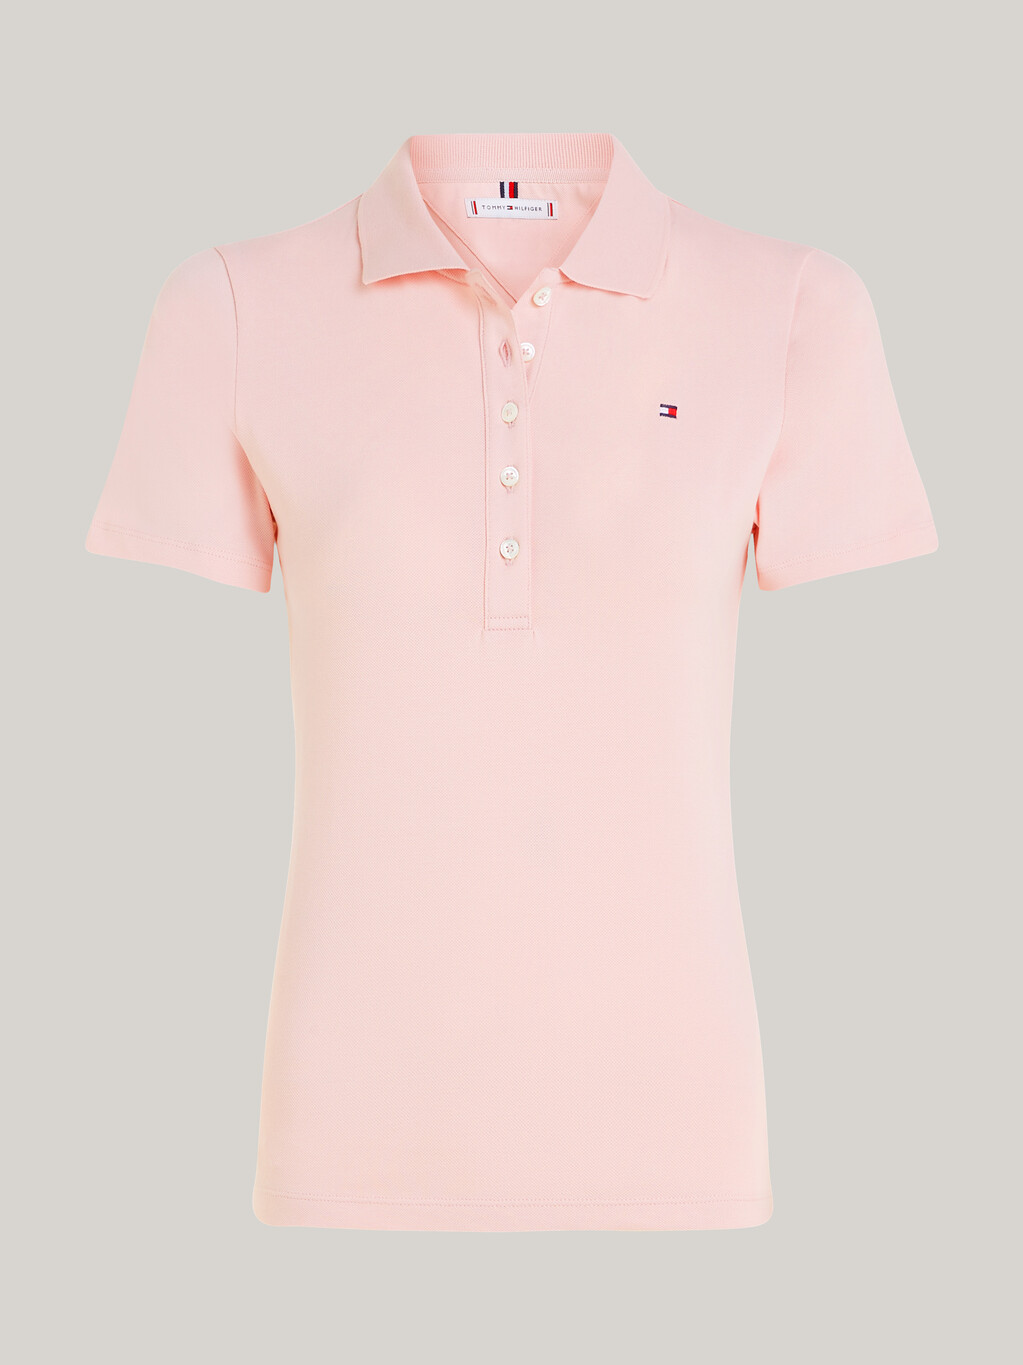 1985 Collection Slim Fit Polo | pink | Tommy Hilfiger Malaysia